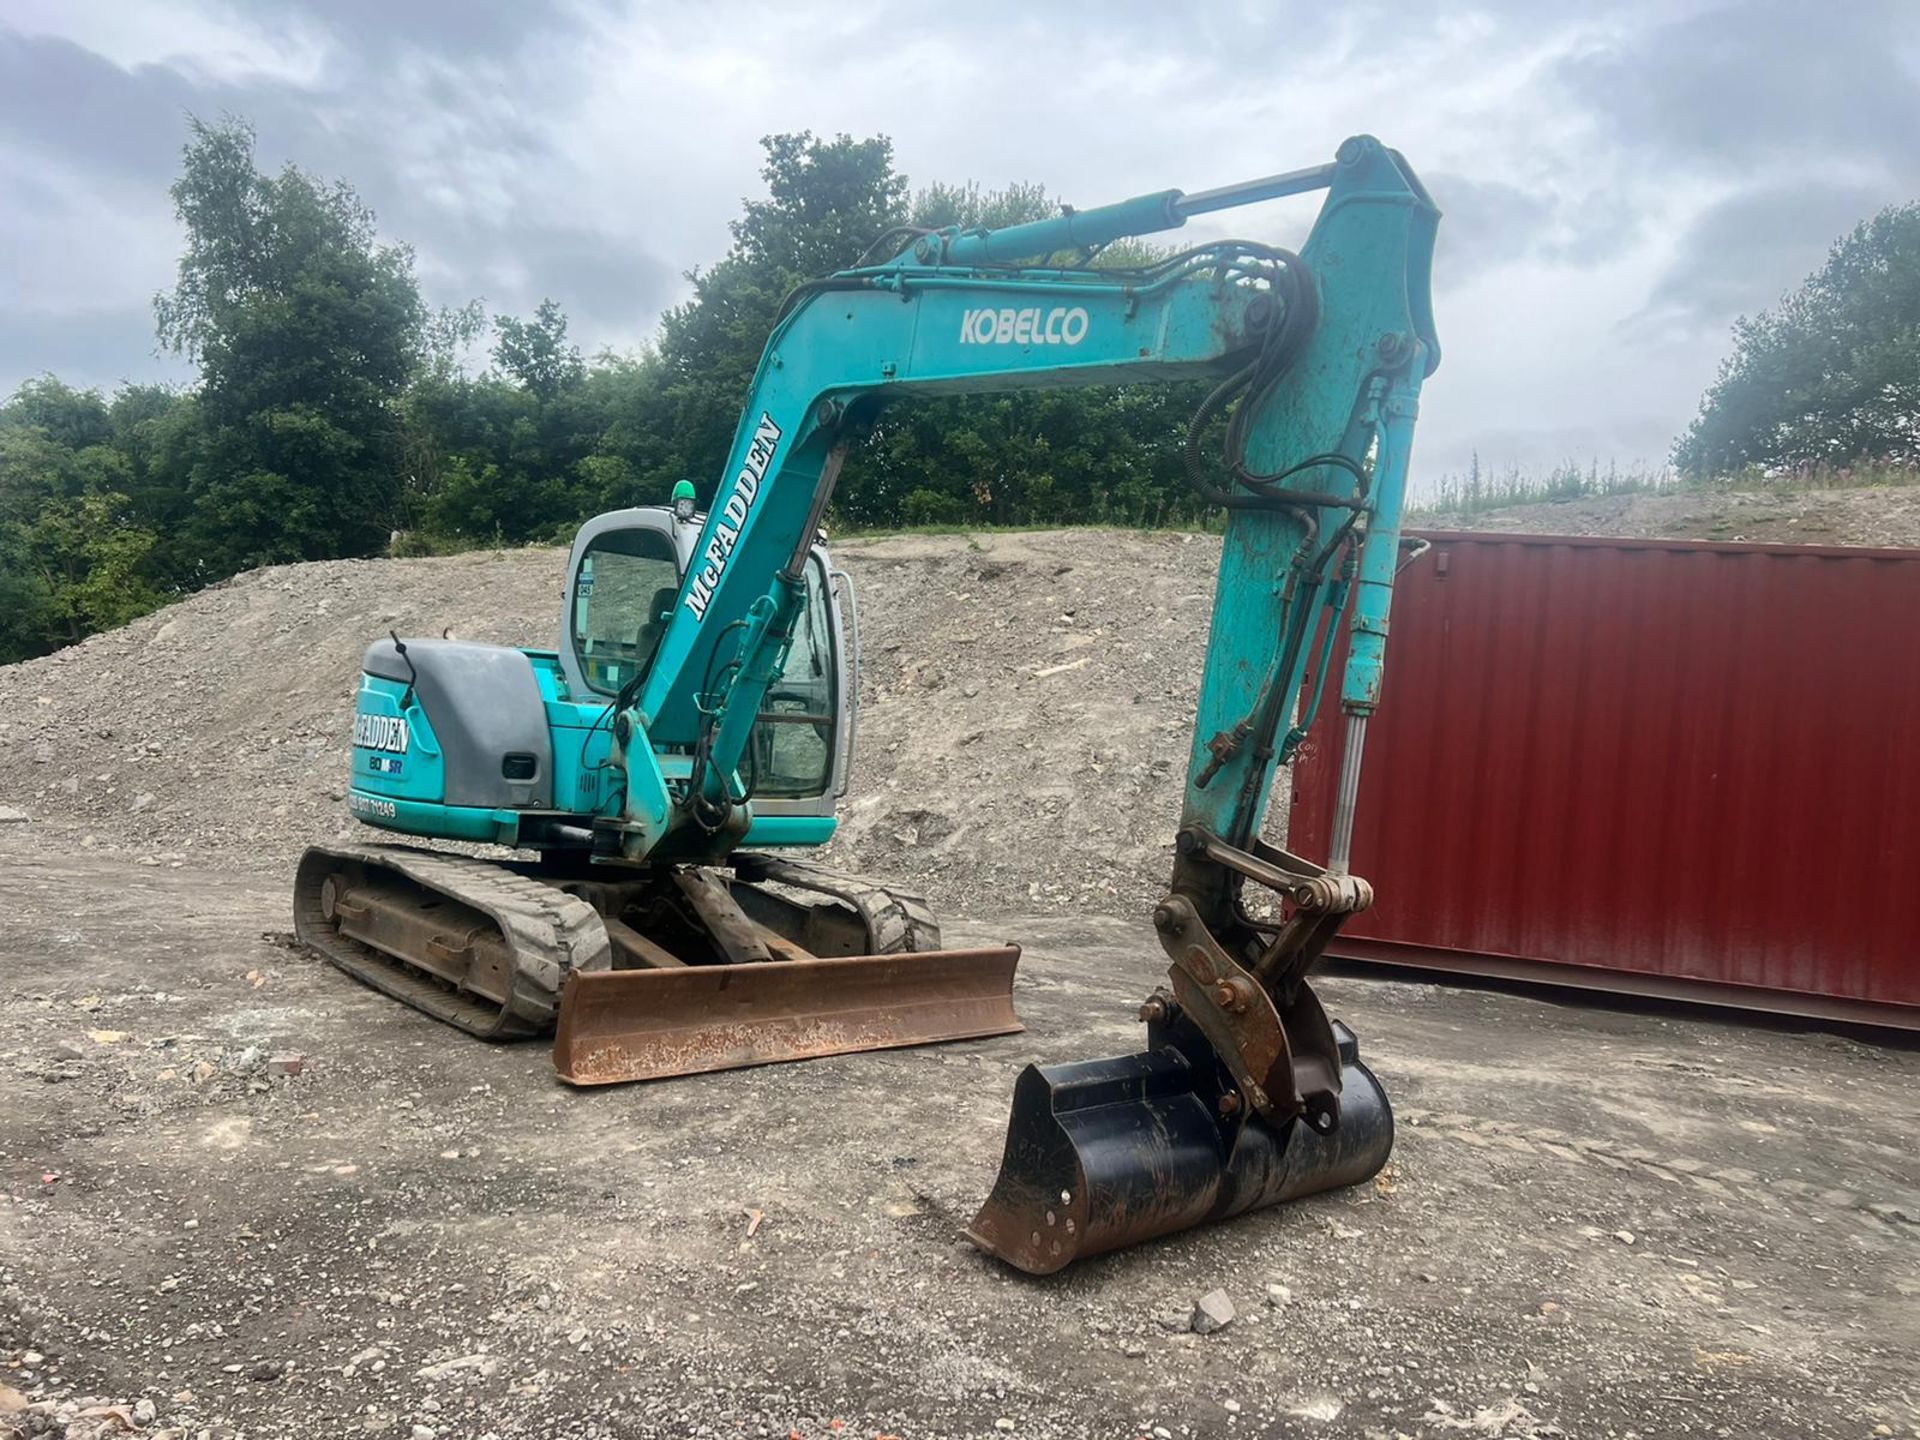 Kobelco 80MSR 8 Tonne Excavator With Blade, Runs Drives And Digs,Showing A Low 9117 Hours!*PLUS VAT* - Image 2 of 29